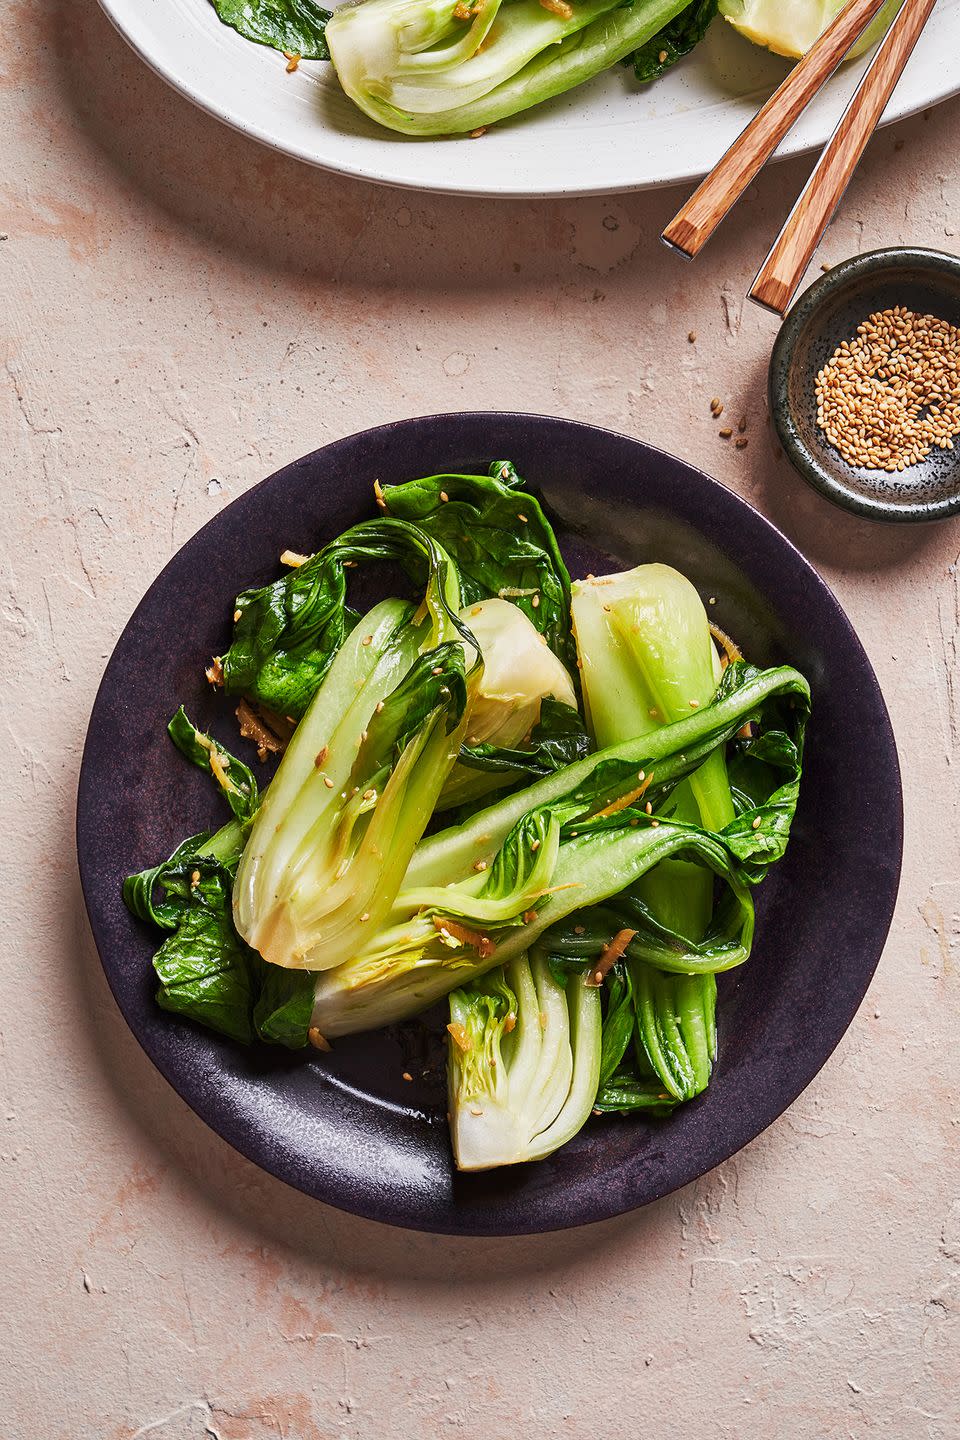 bok choy topped with ginger and sesame seeds in a black bowl